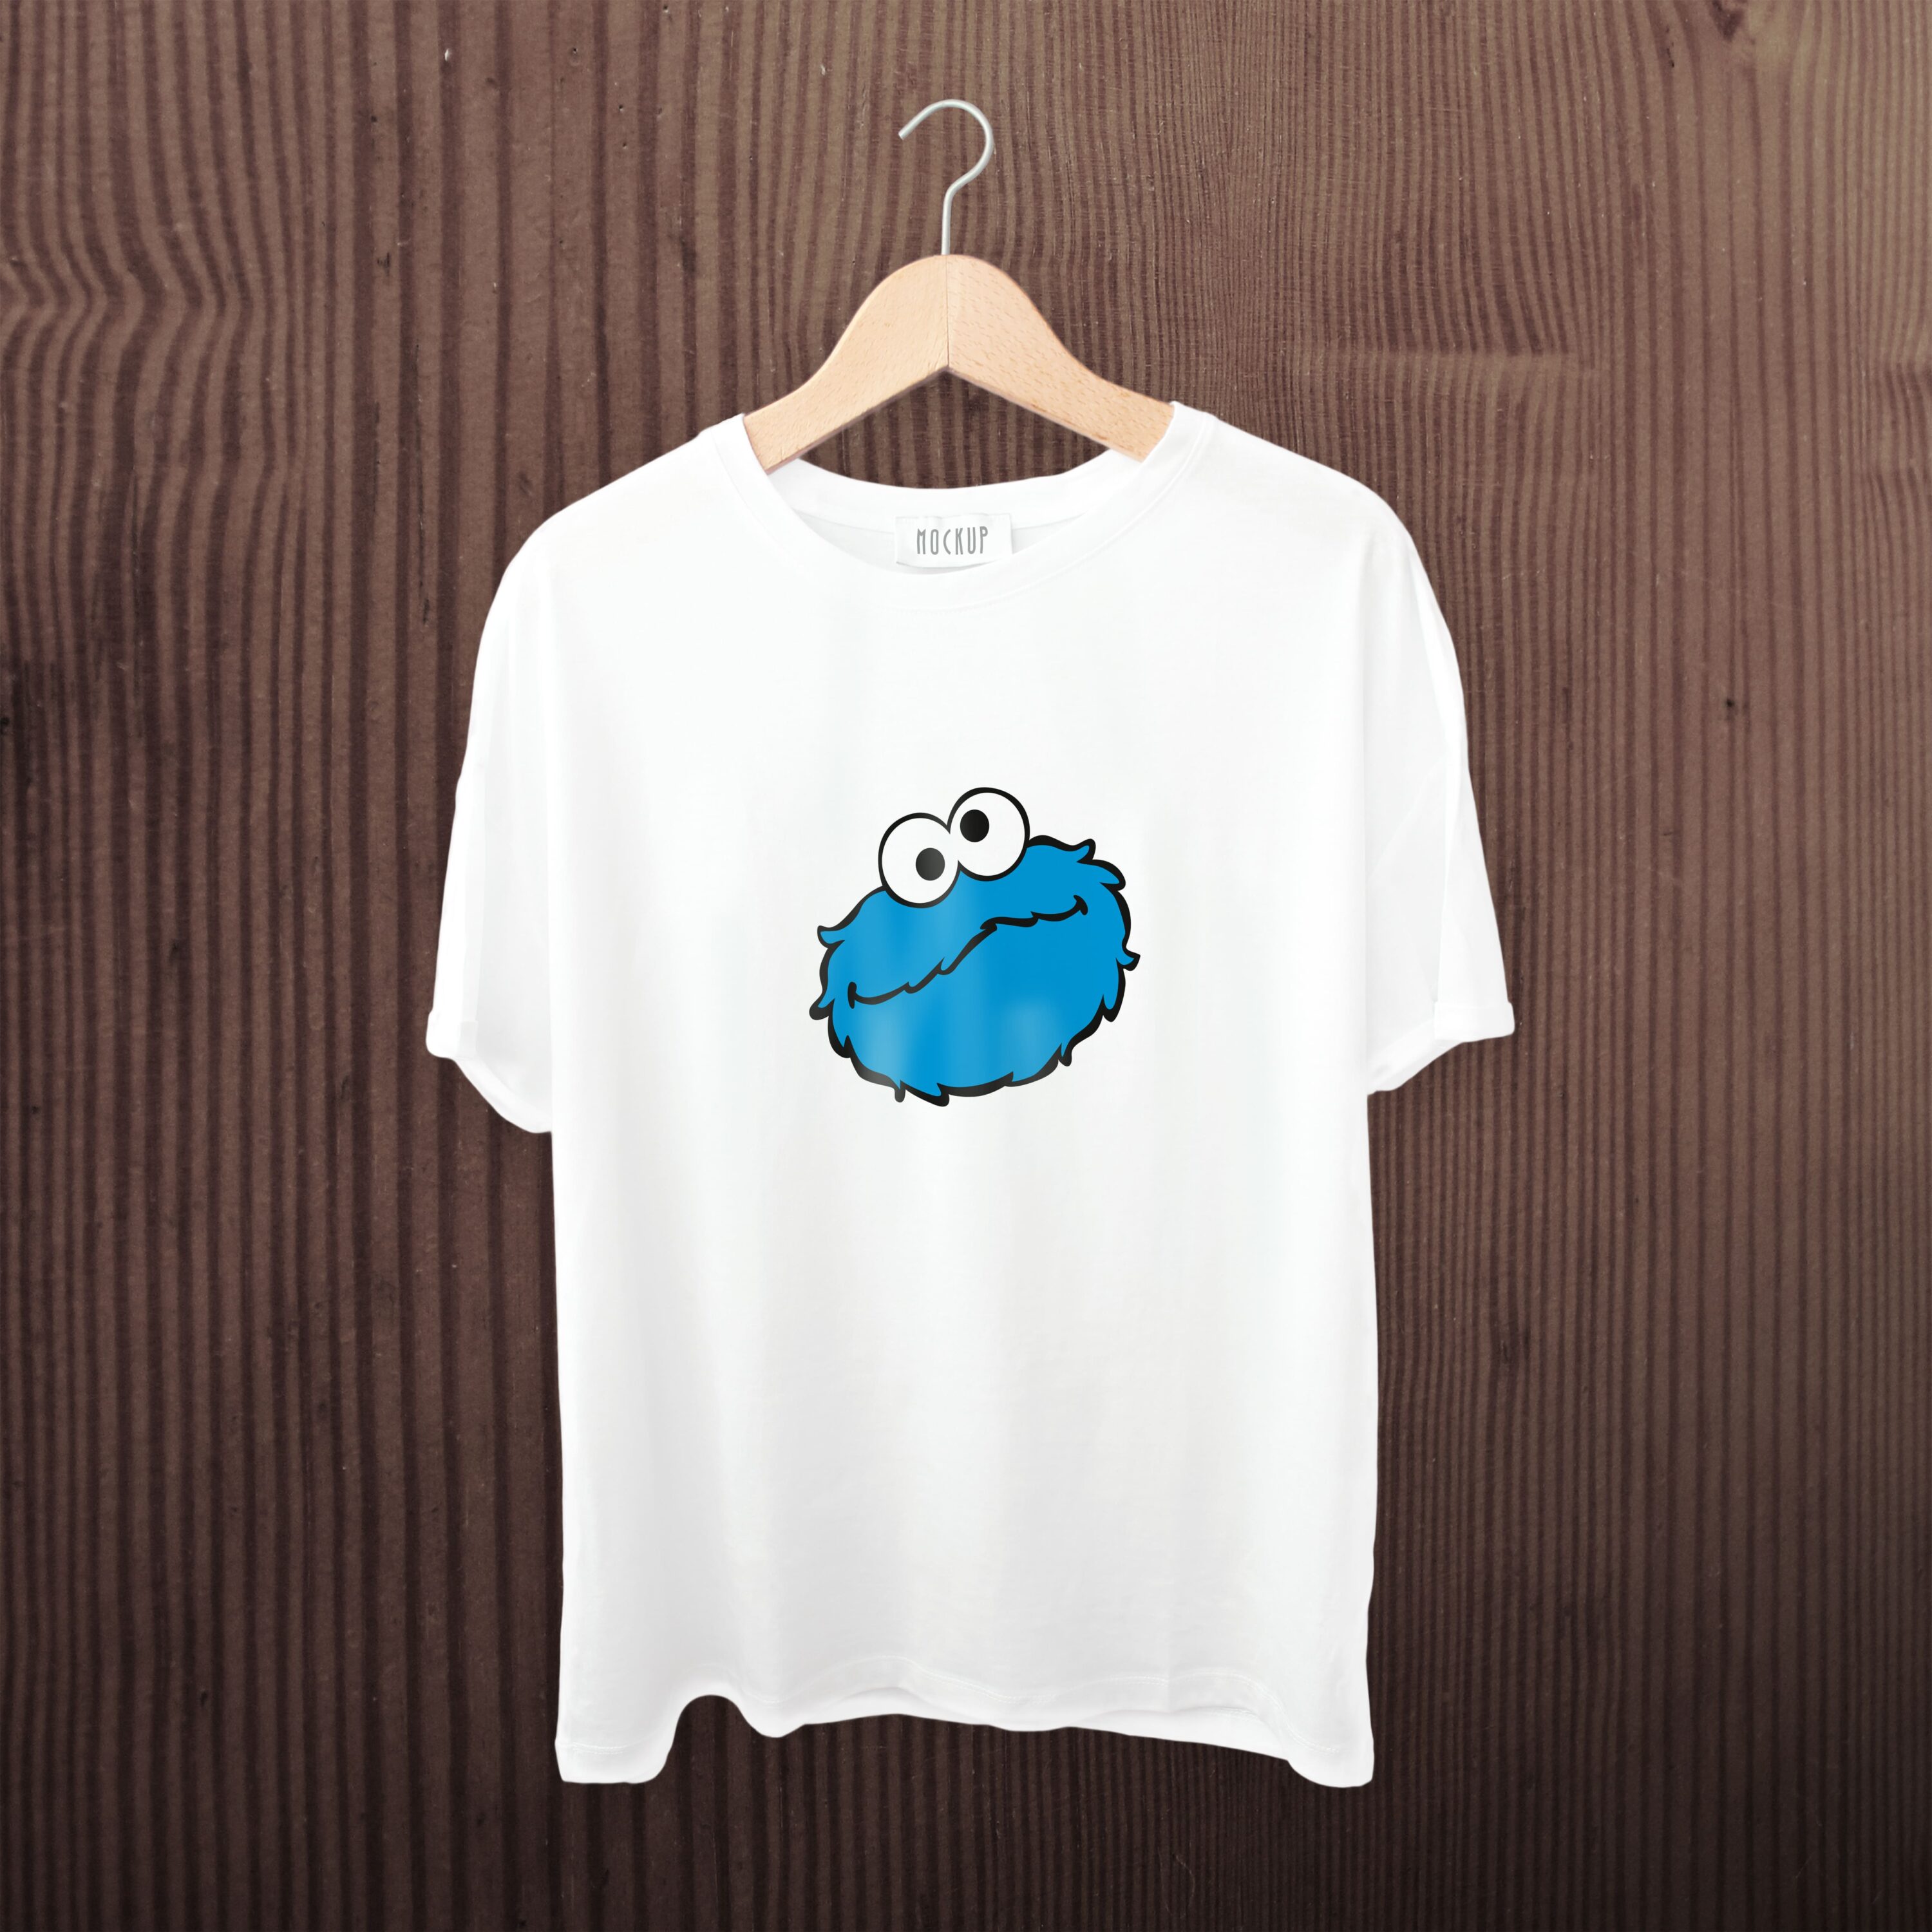 A white t-shirt with a alarmed cookie monster face.